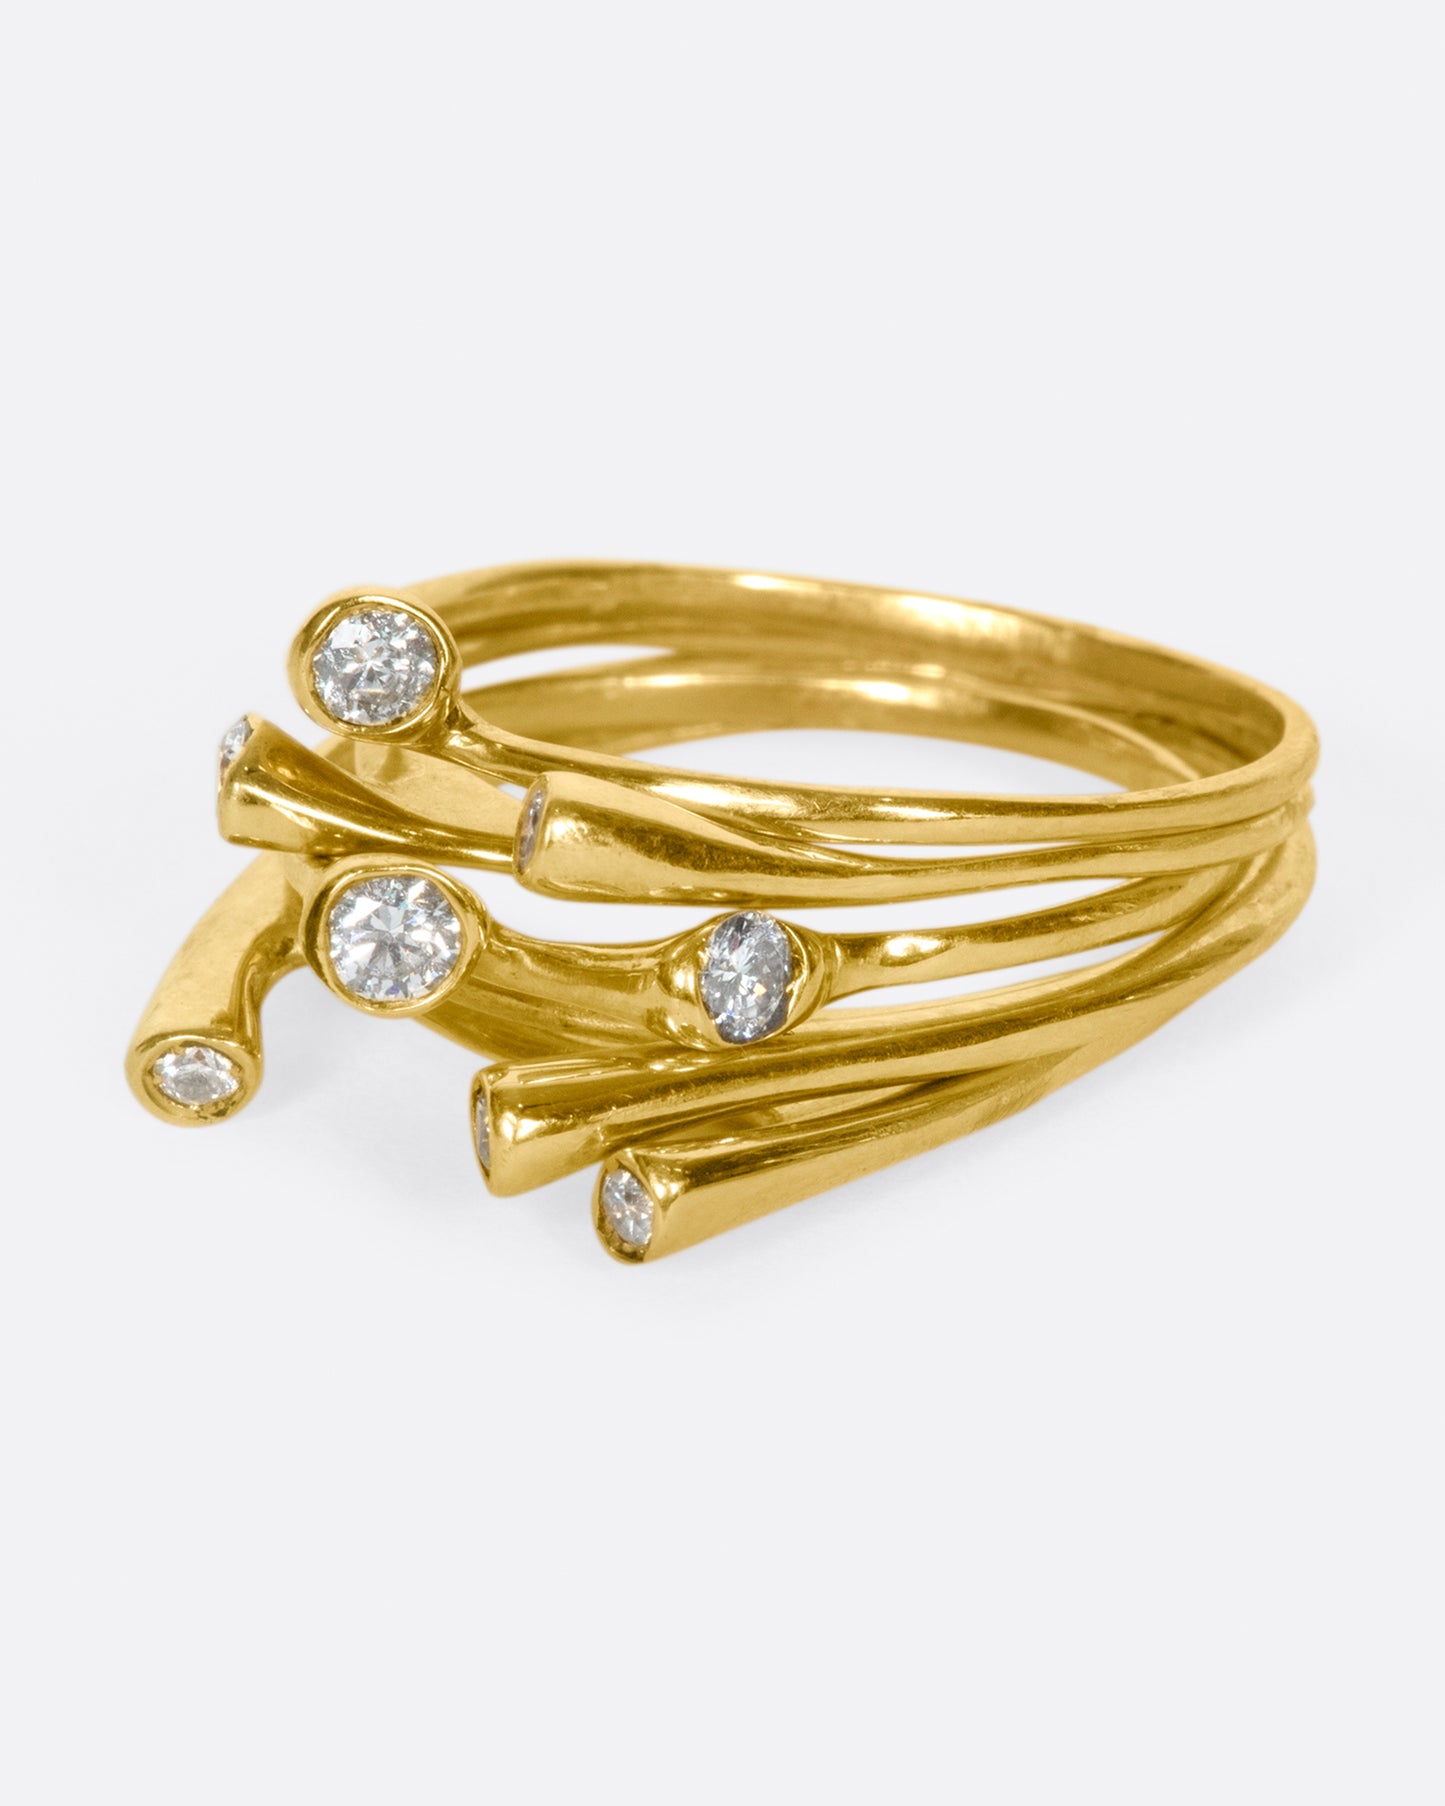 Cool from every angle; there is no wrong way to stack these rings.